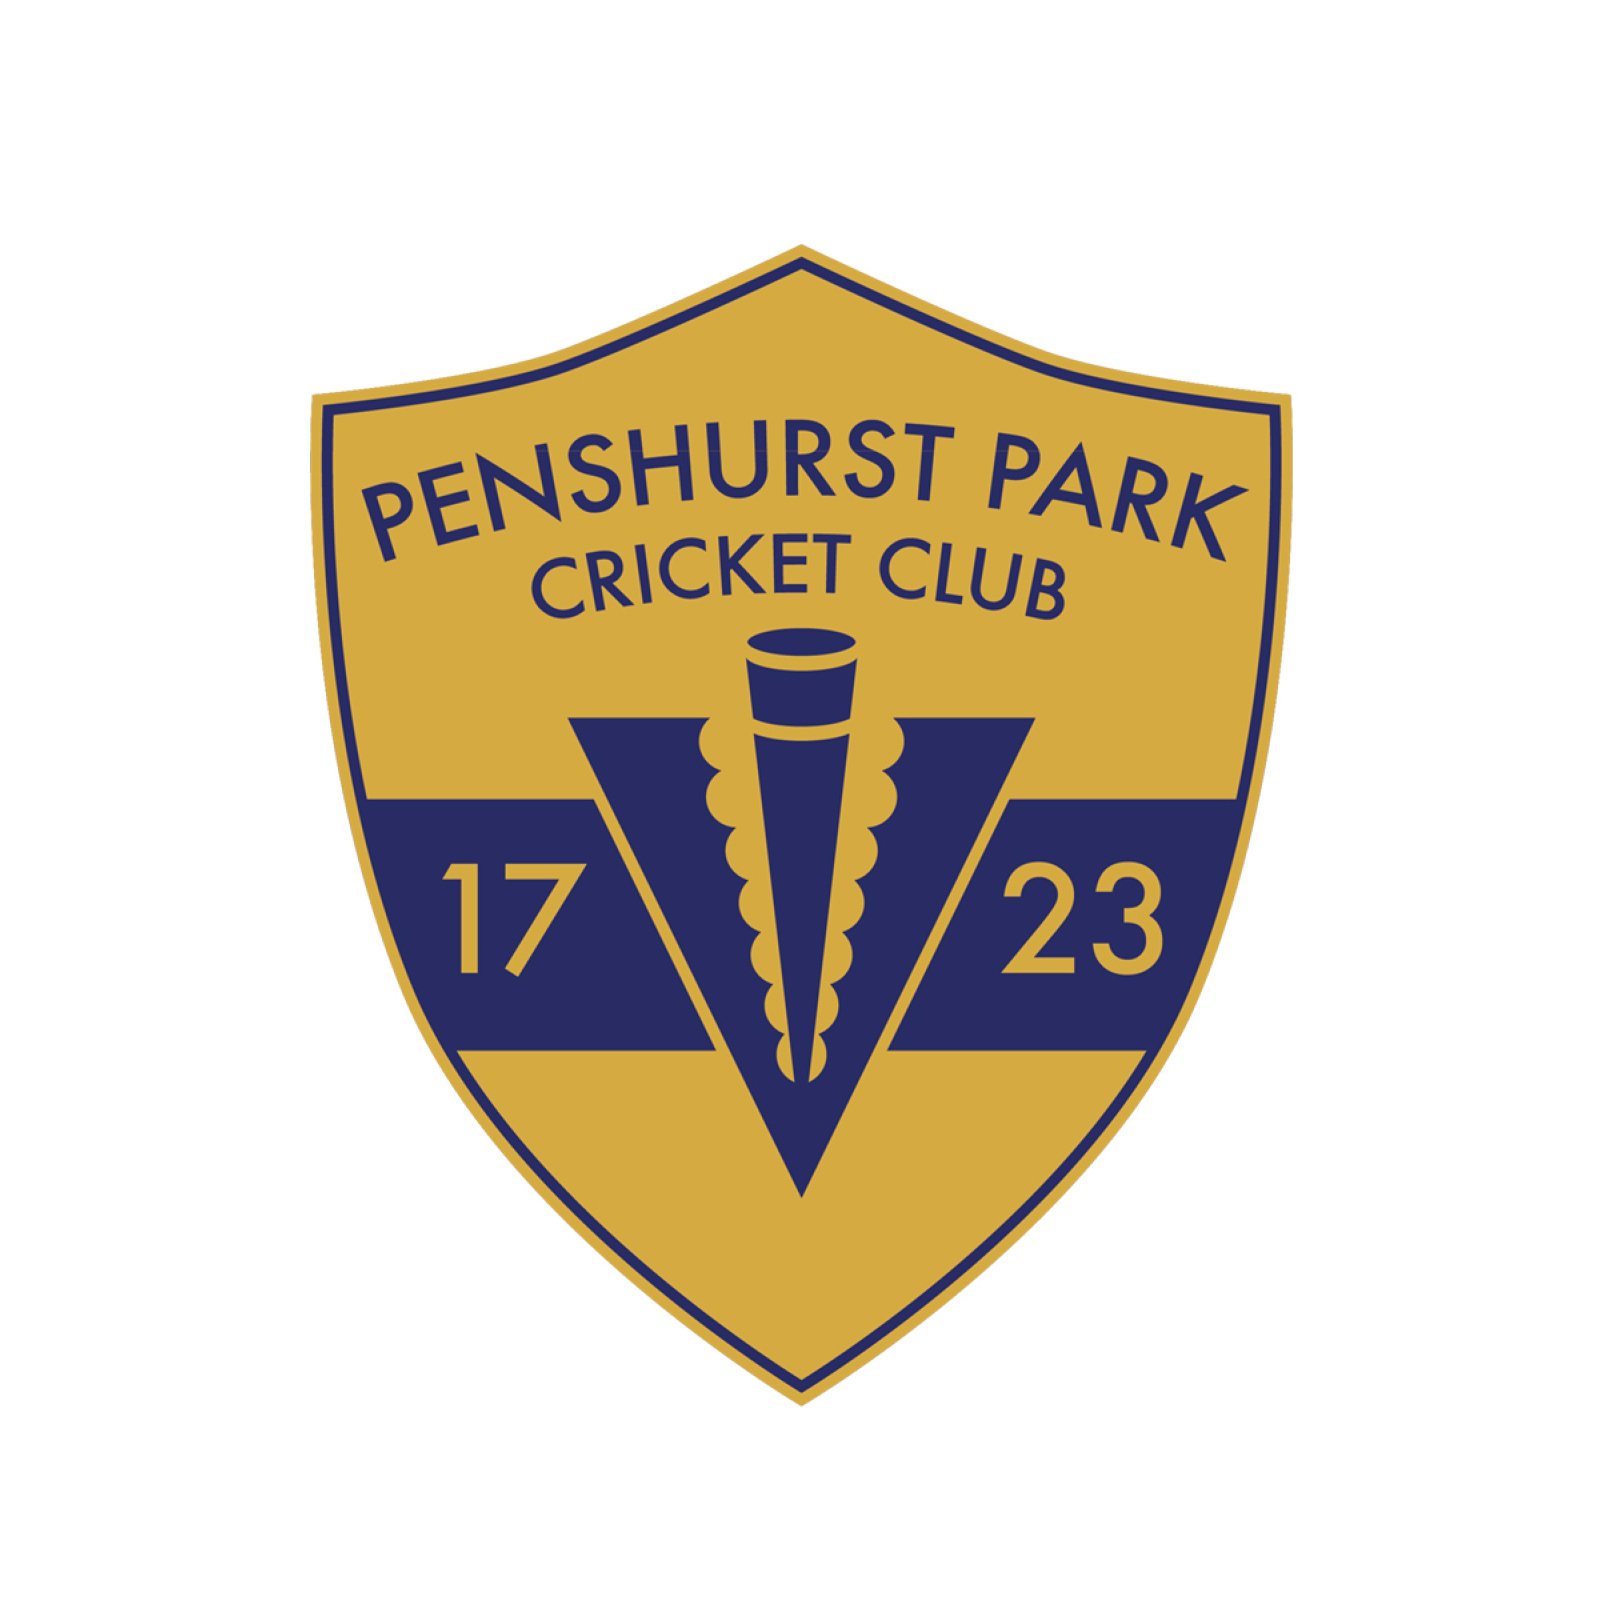 Welcome to the oldest privately owned cricket club in the world. Based in the idyllic grounds of Penshurst Place, Kent. Est 1723